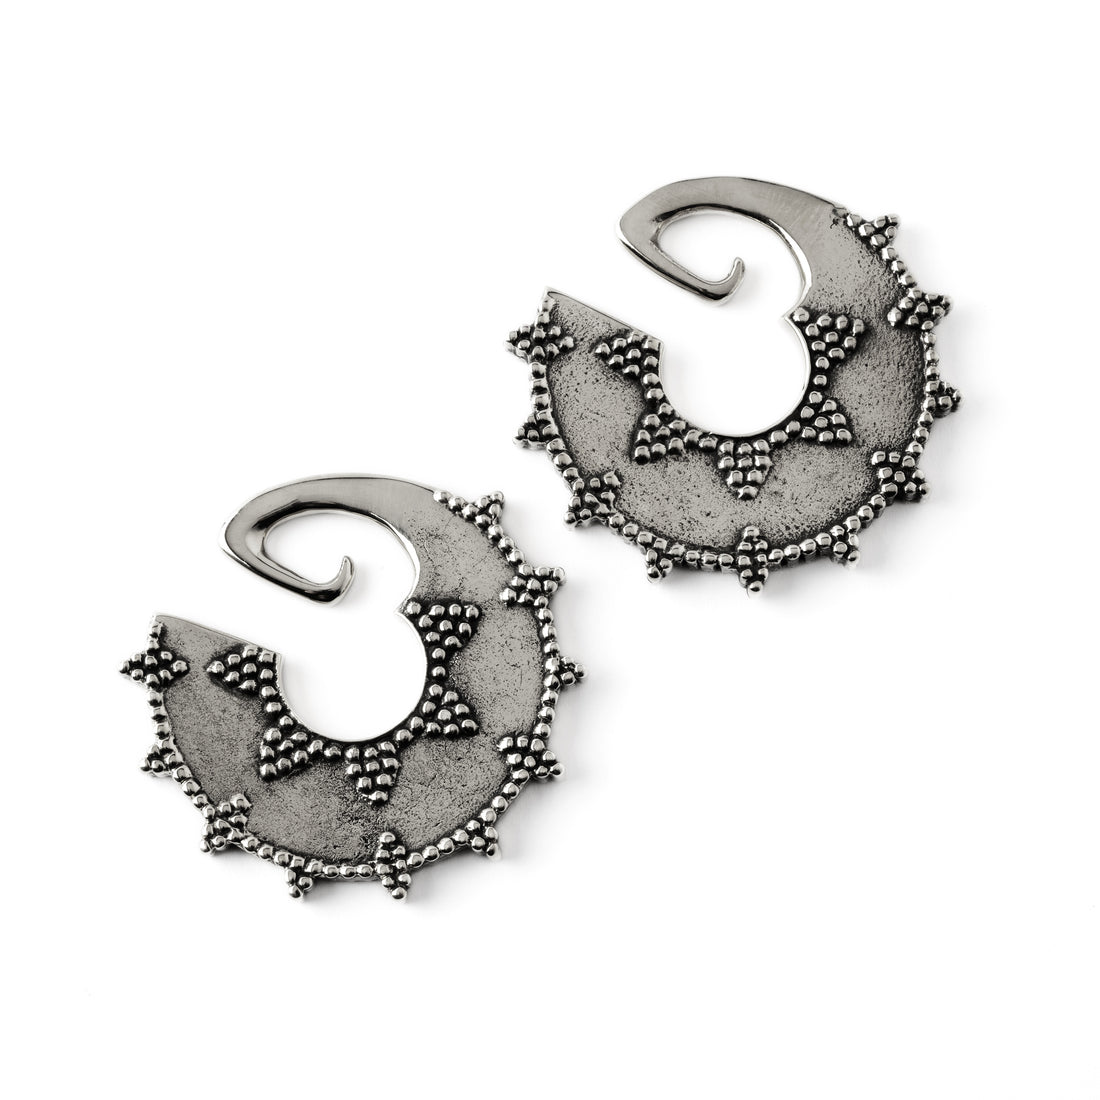 Selene tribal disc ear weights hangers pair front view